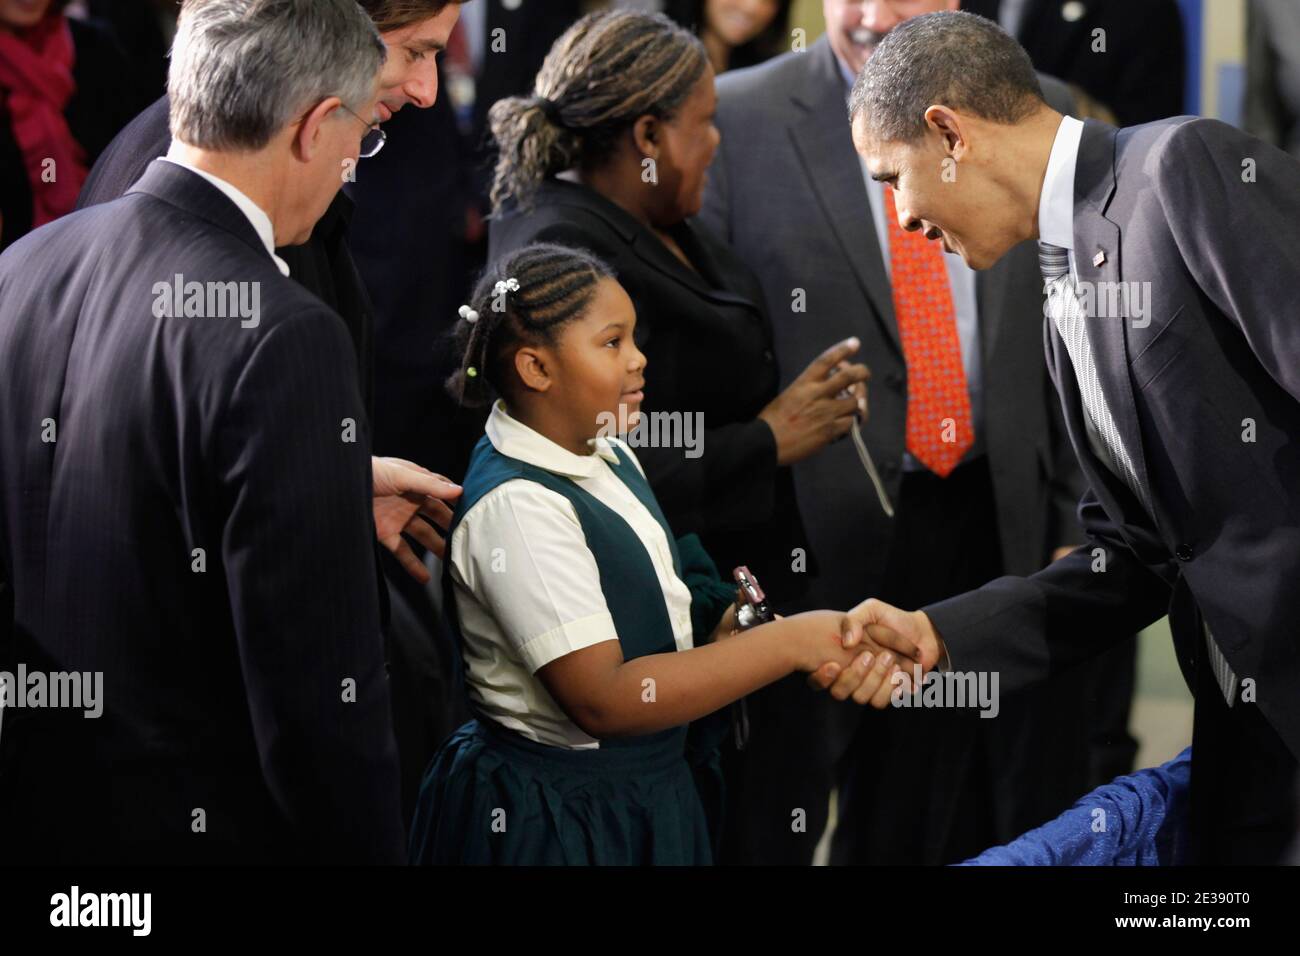 U.S. President Barack Obama (R) greets a young student after signing the Healthy, Hunger-Free Kids Act of 2010 at Harriet Tubman Elementary School in Washington, DC, USA, on December 13, 2010. In an effort to provide children with better school lunches and breakfasts, the new law puts $4.5 million in the hands of child nutrition programs, sets nutrition standards on school vending machines, helps create school gardens and makes sure that quality drinking water is available during meal times. Photo by Chip Somodevilla/ABACAPRESS.COM Stock Photo